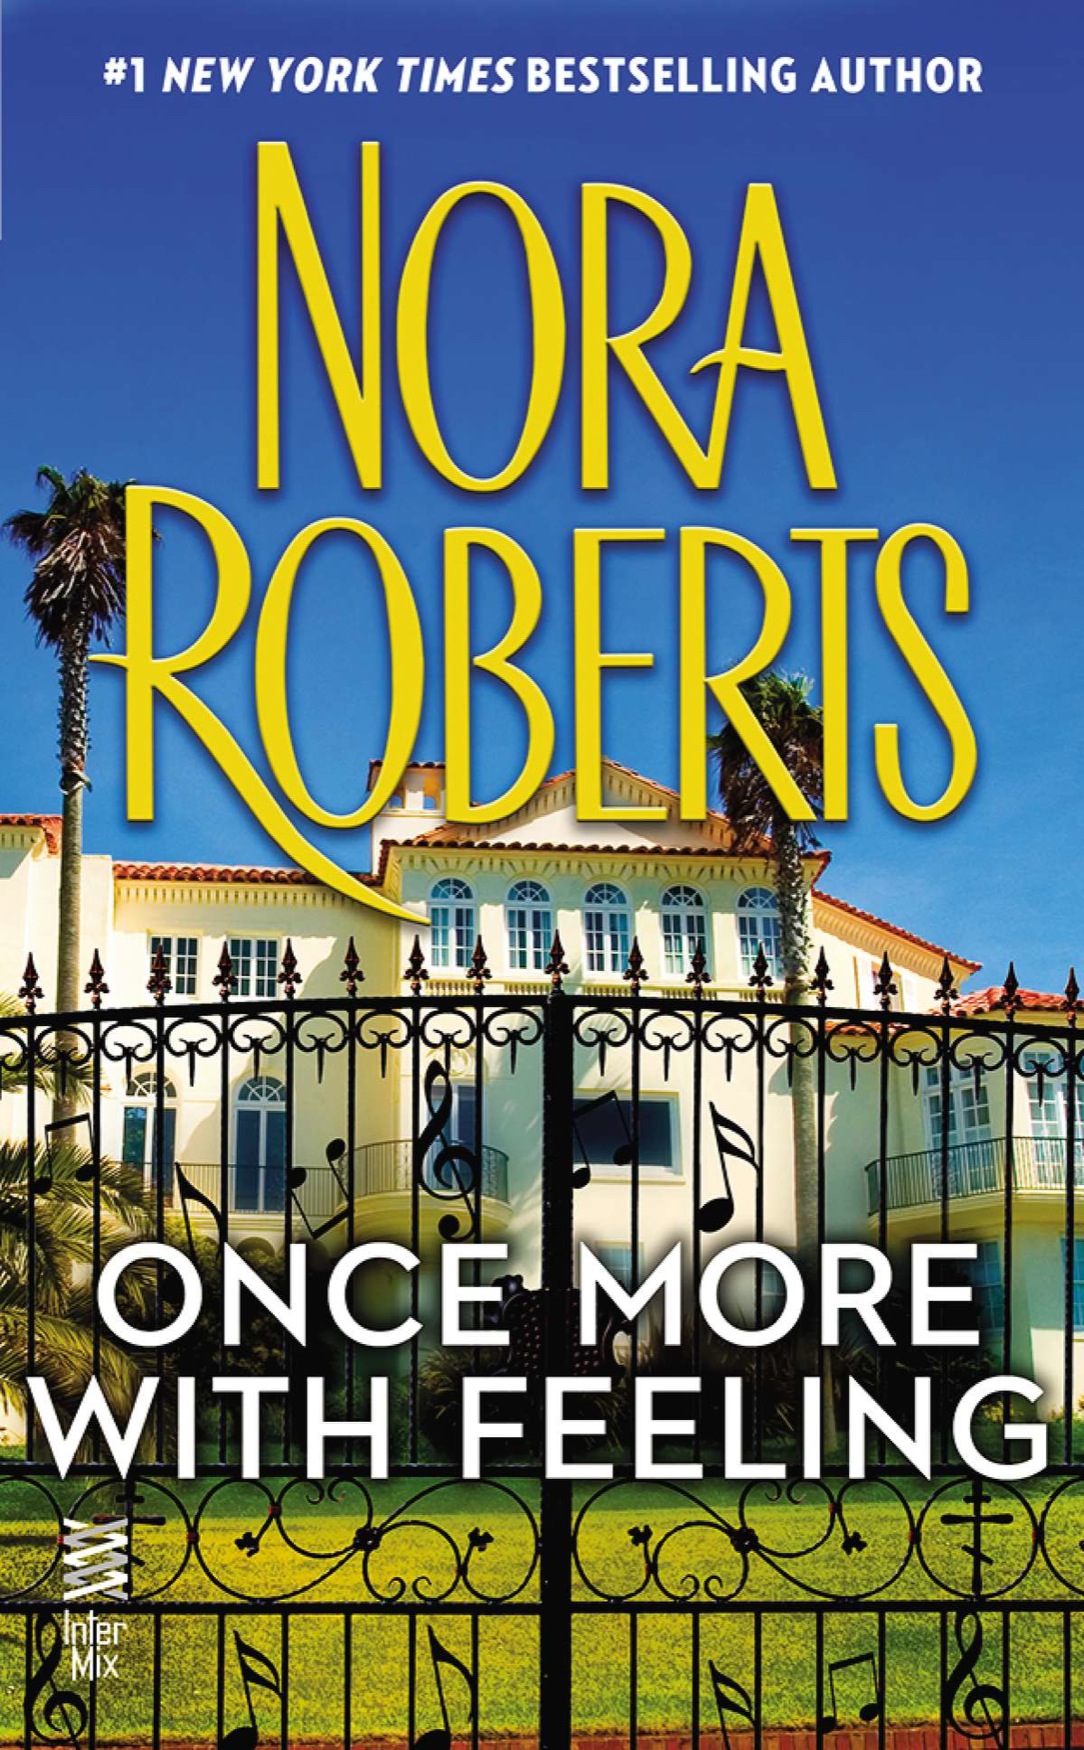 Once More With Feeling (2013) by Nora Roberts